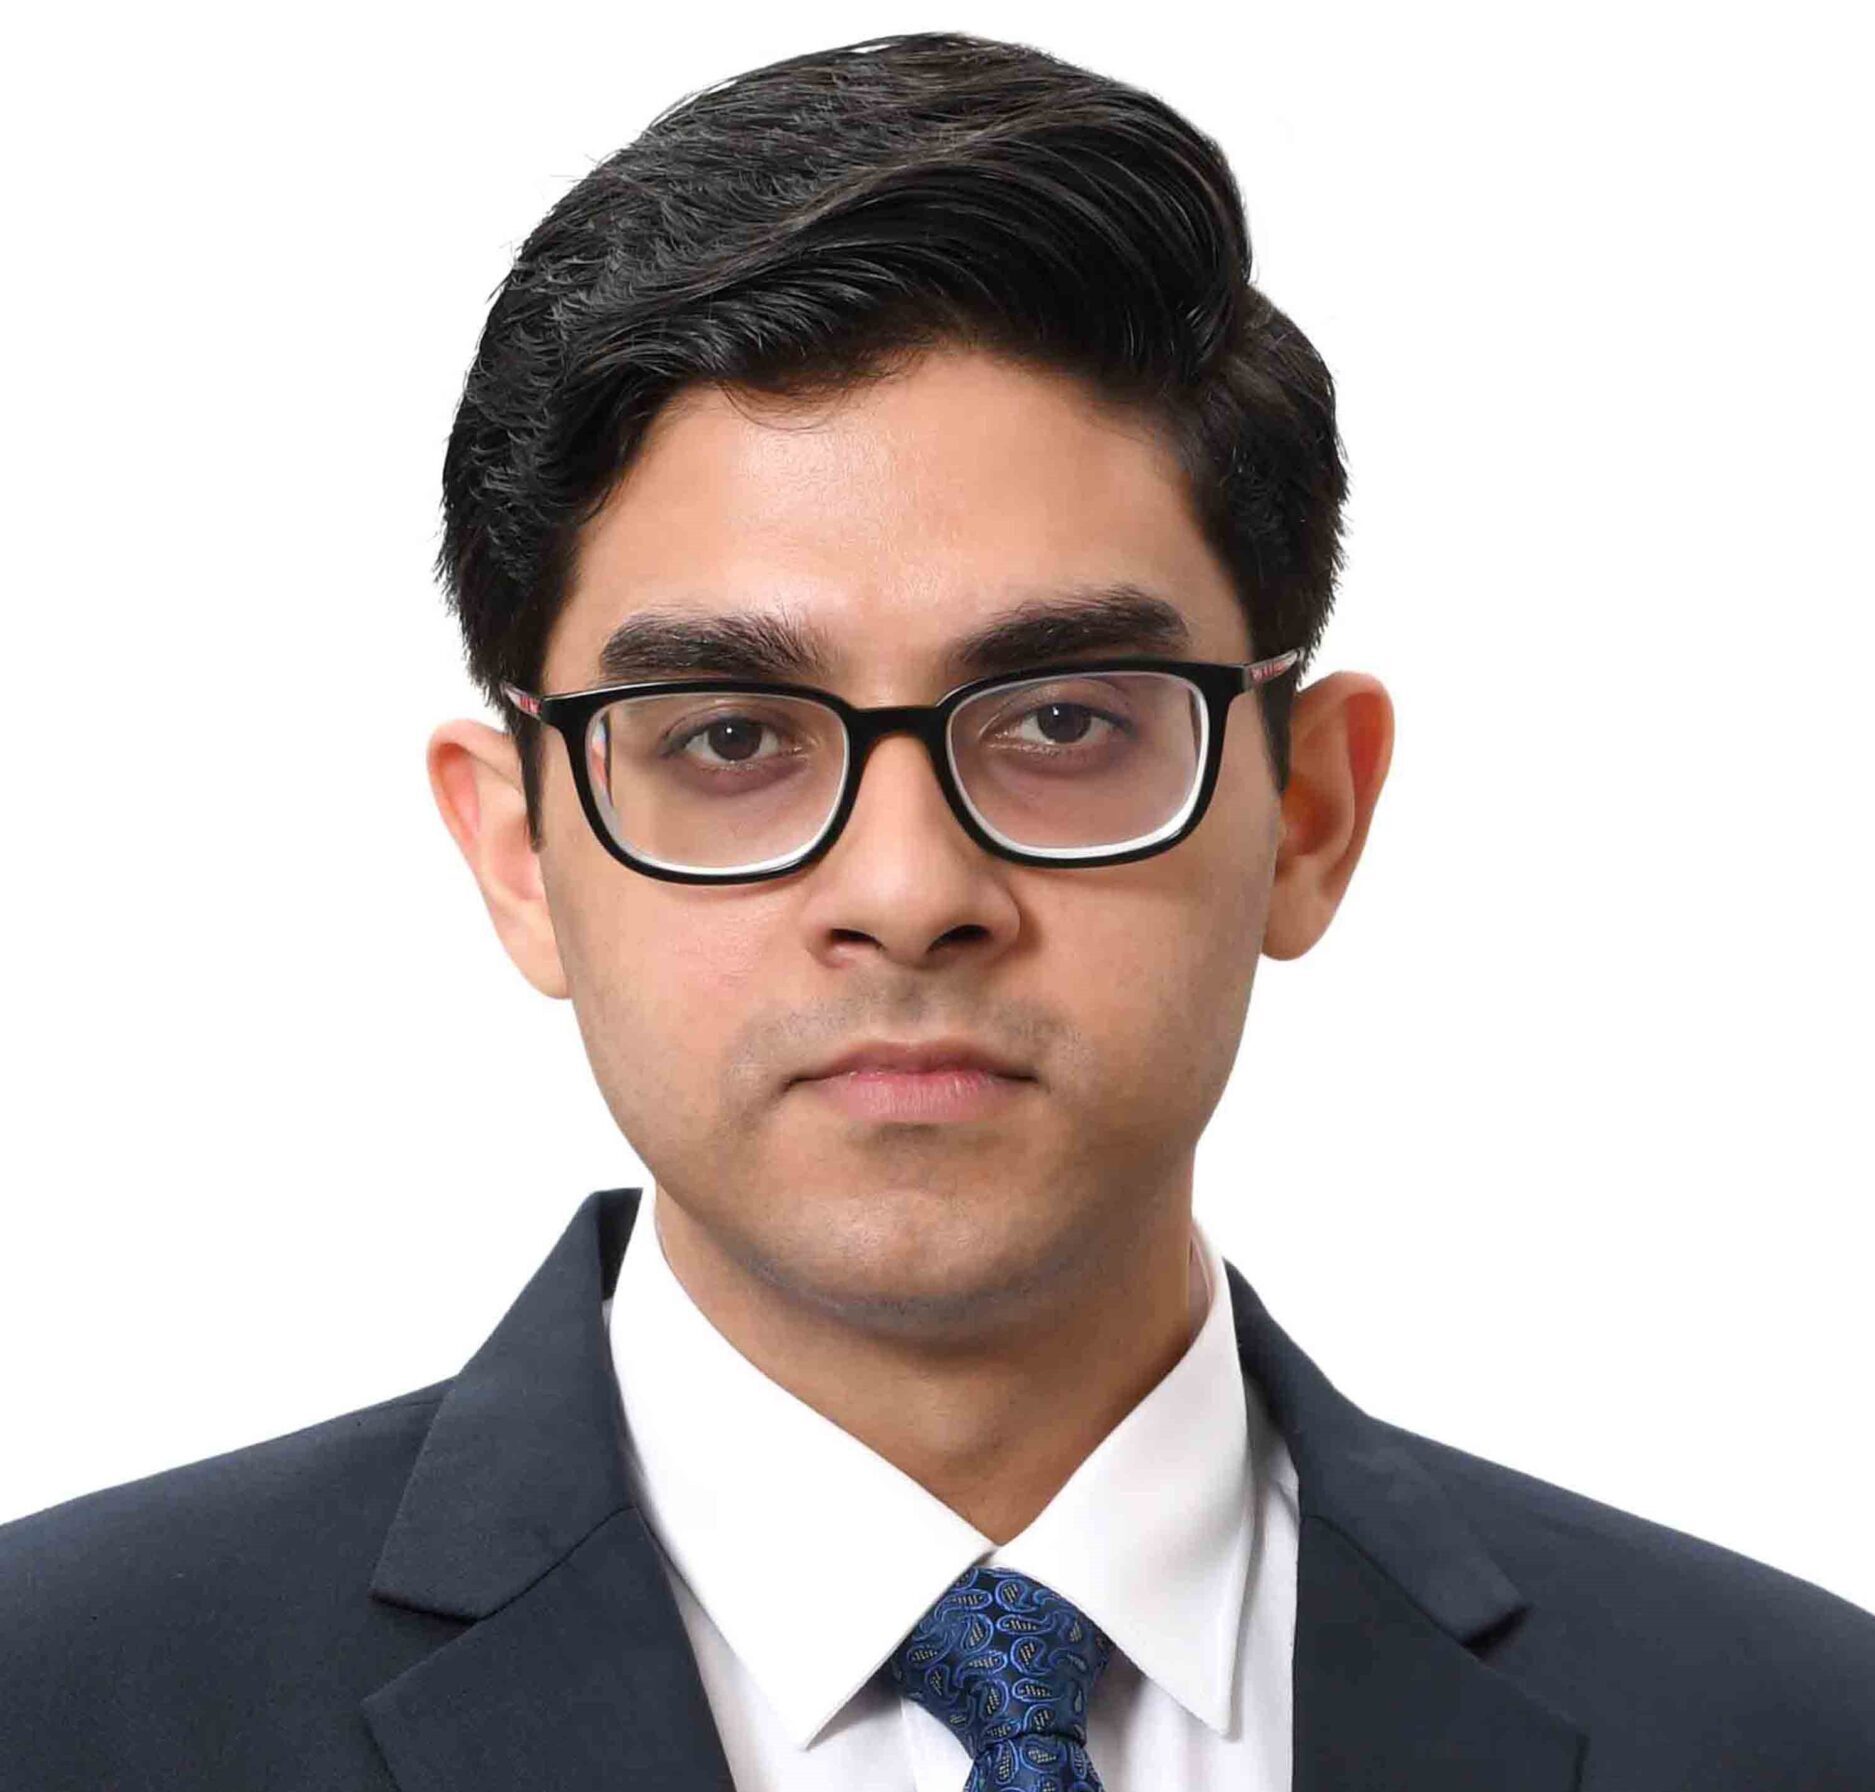 The Clarks Hotels & Resorts appoints Sarhtak Kapur as Business Development Manager